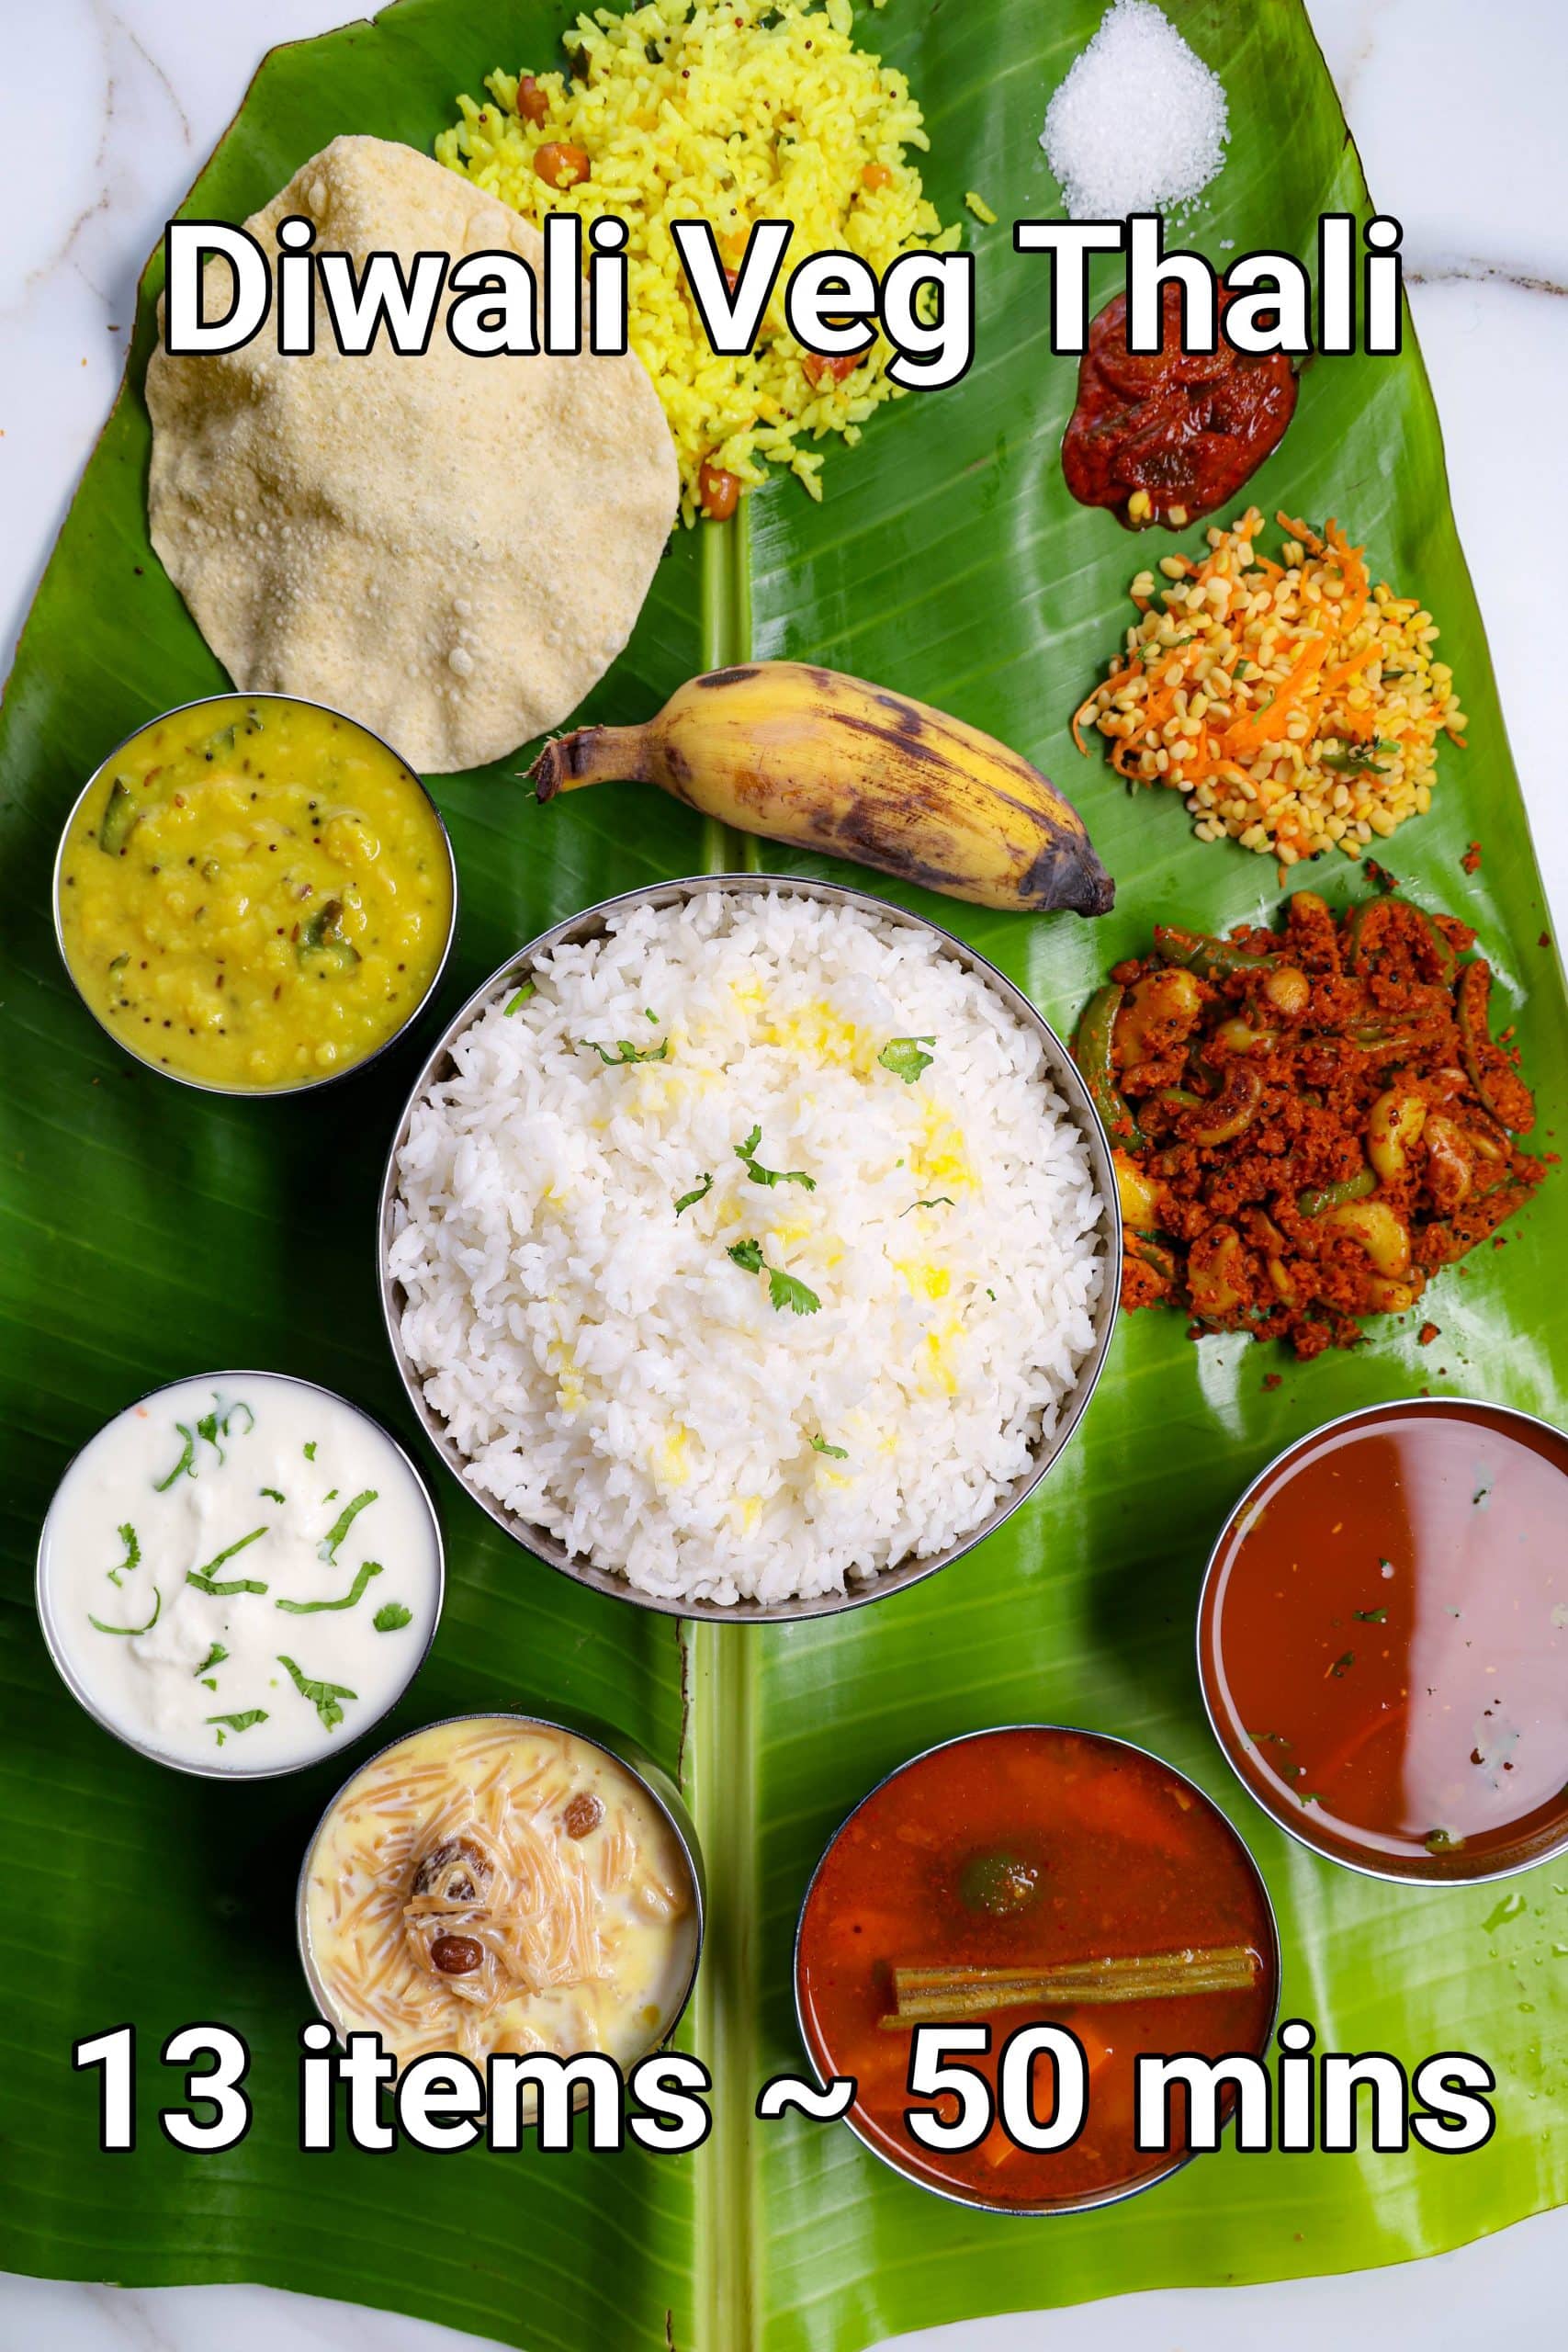 south indian meals in banana leaf